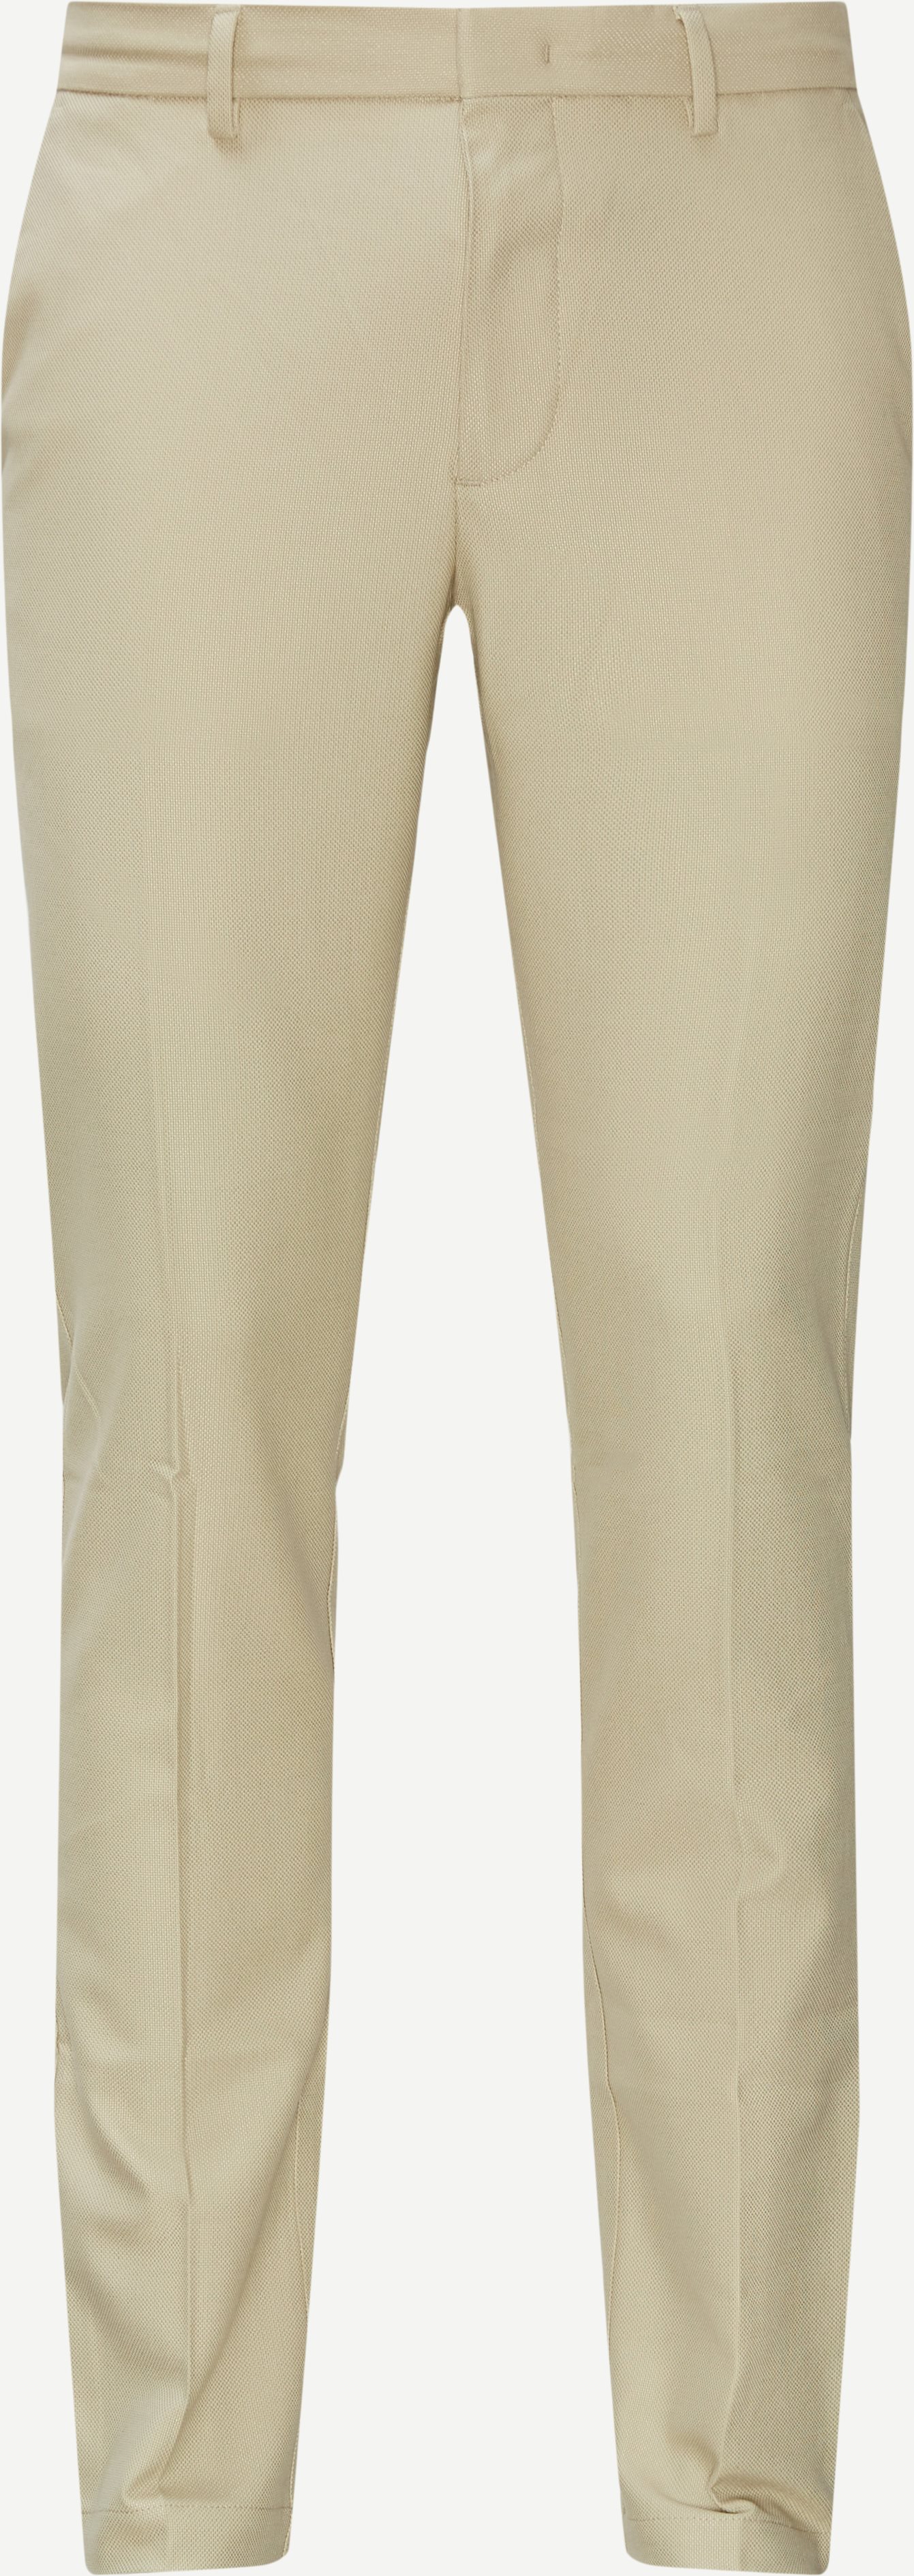 Trousers - Slim fit - Sand